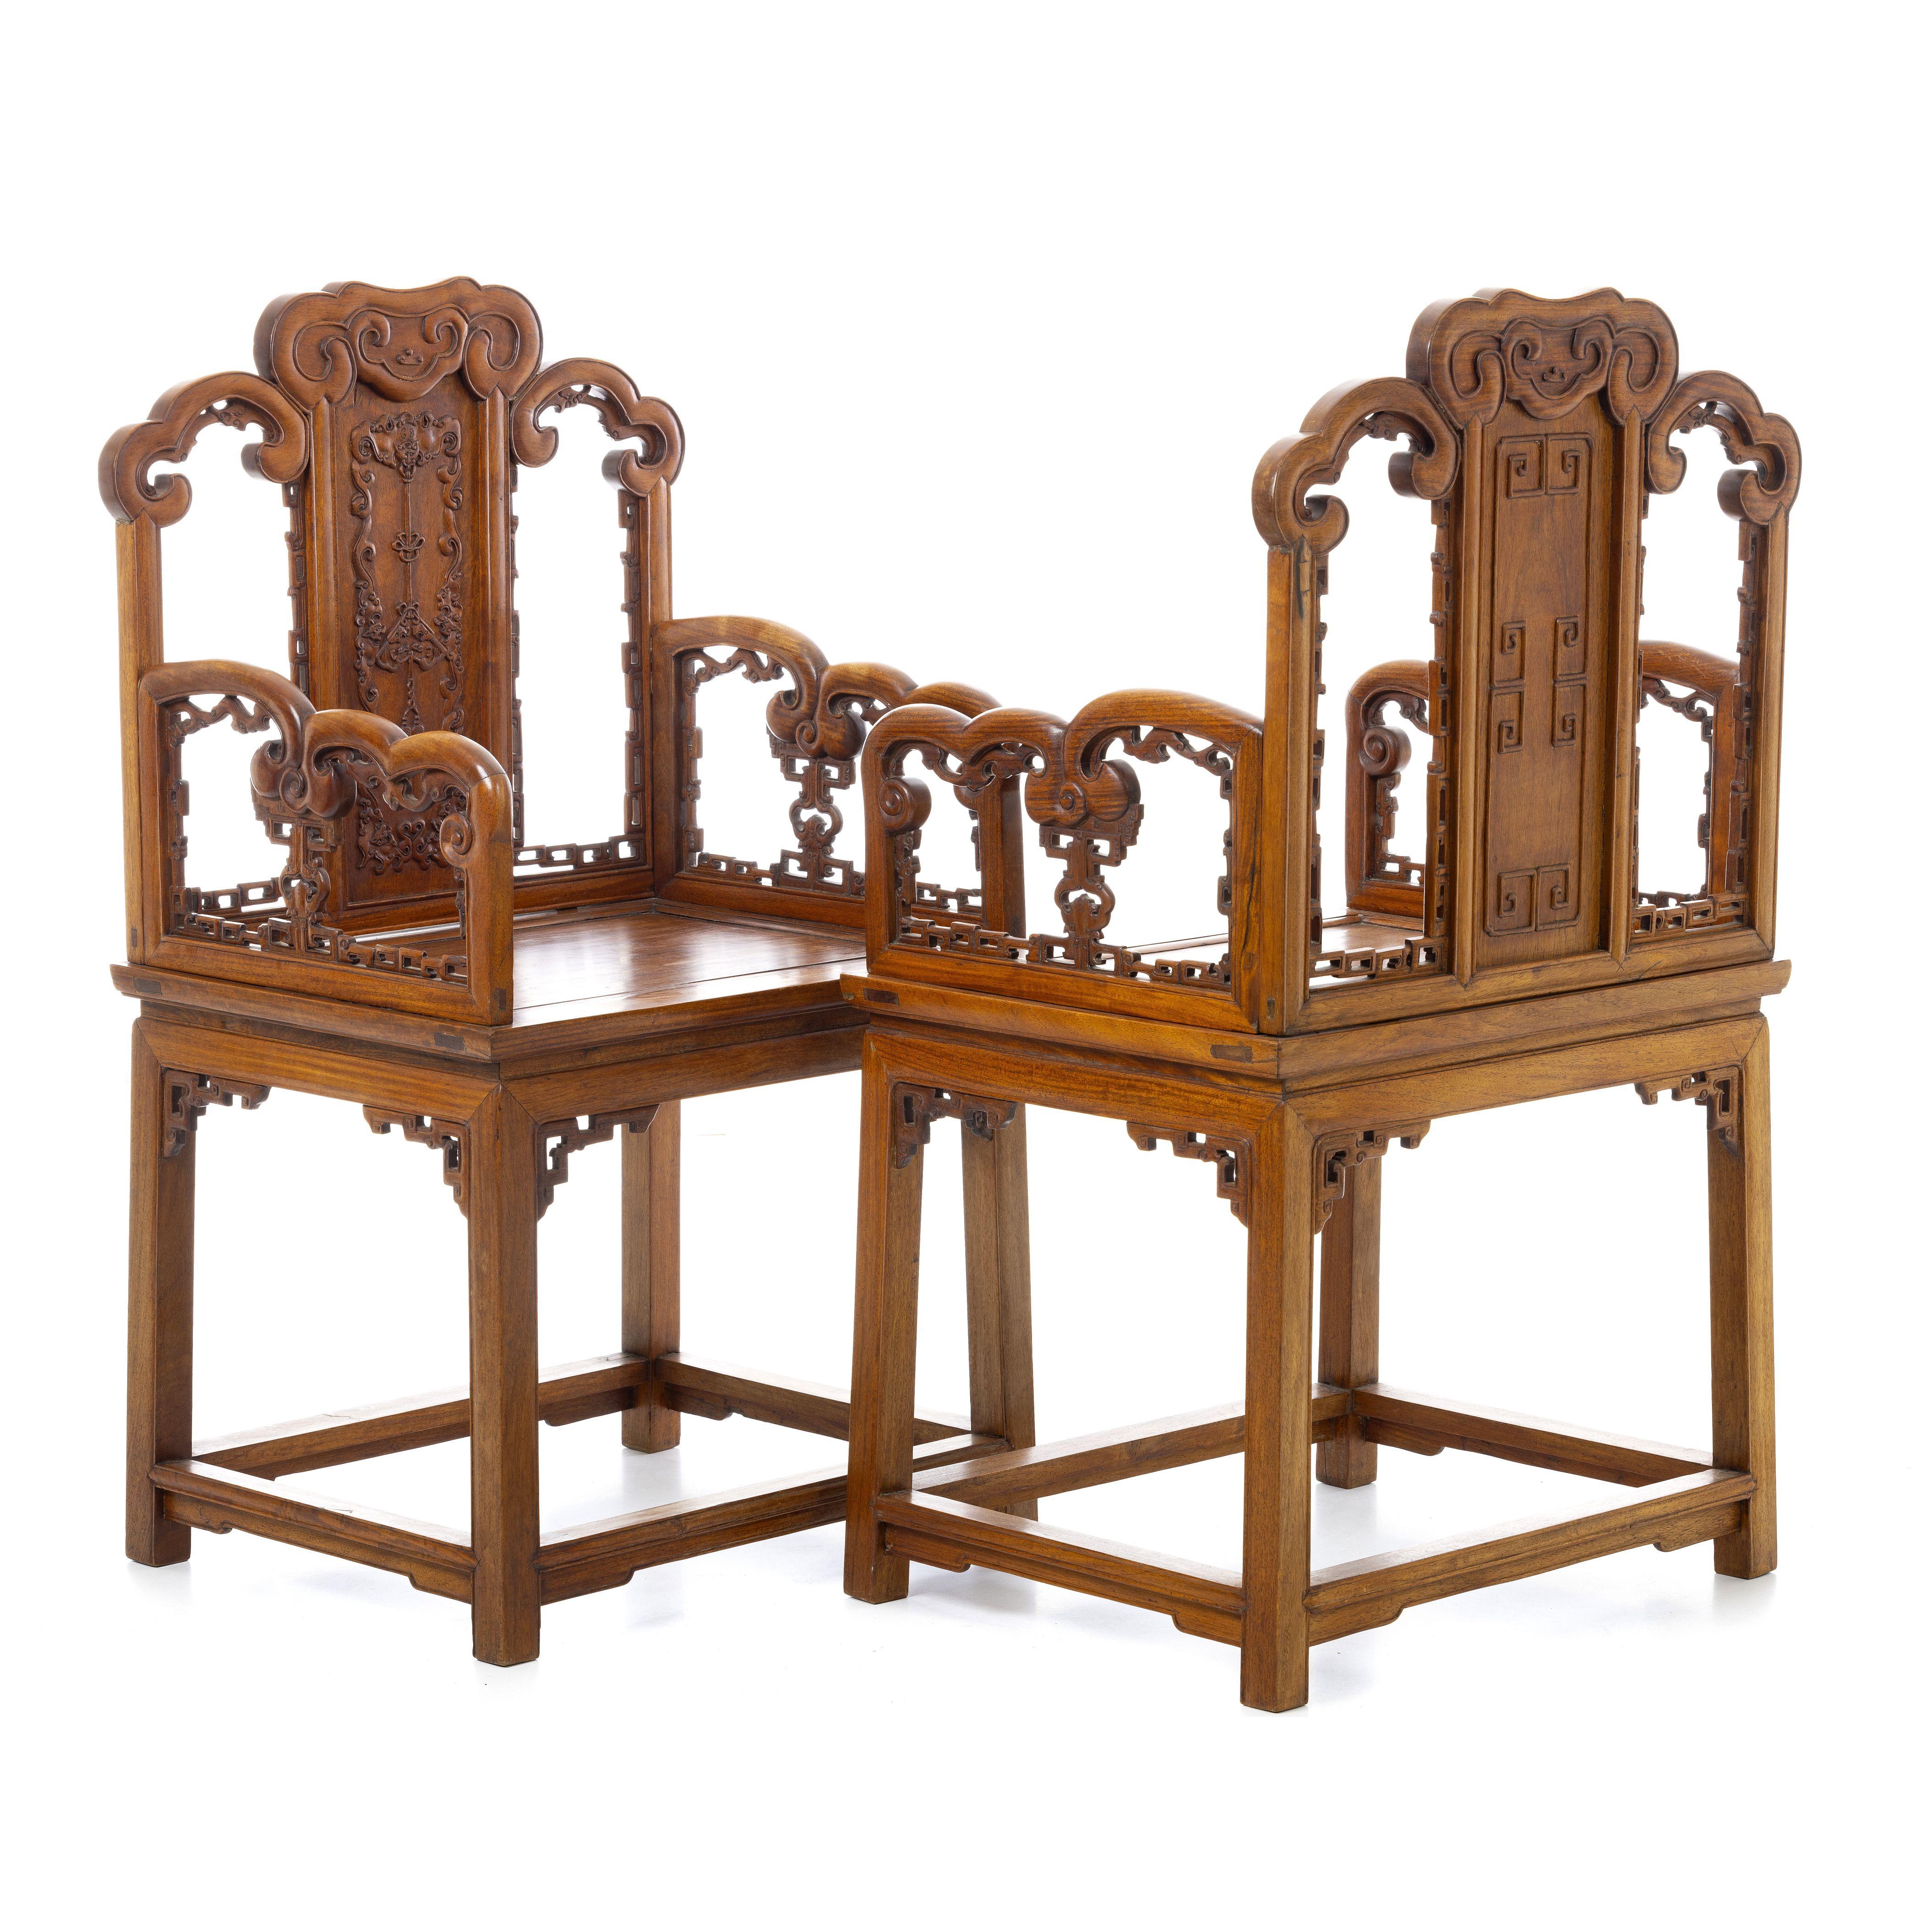 A fine and rare pair of Chinese huanguali wood armchairs dating from Guangxu period, very well carved decoration with fretwork friezes, ruyi and bat motifs on seat frame and armrests and auspicious emblems. A very fine quality pair and a wonderful